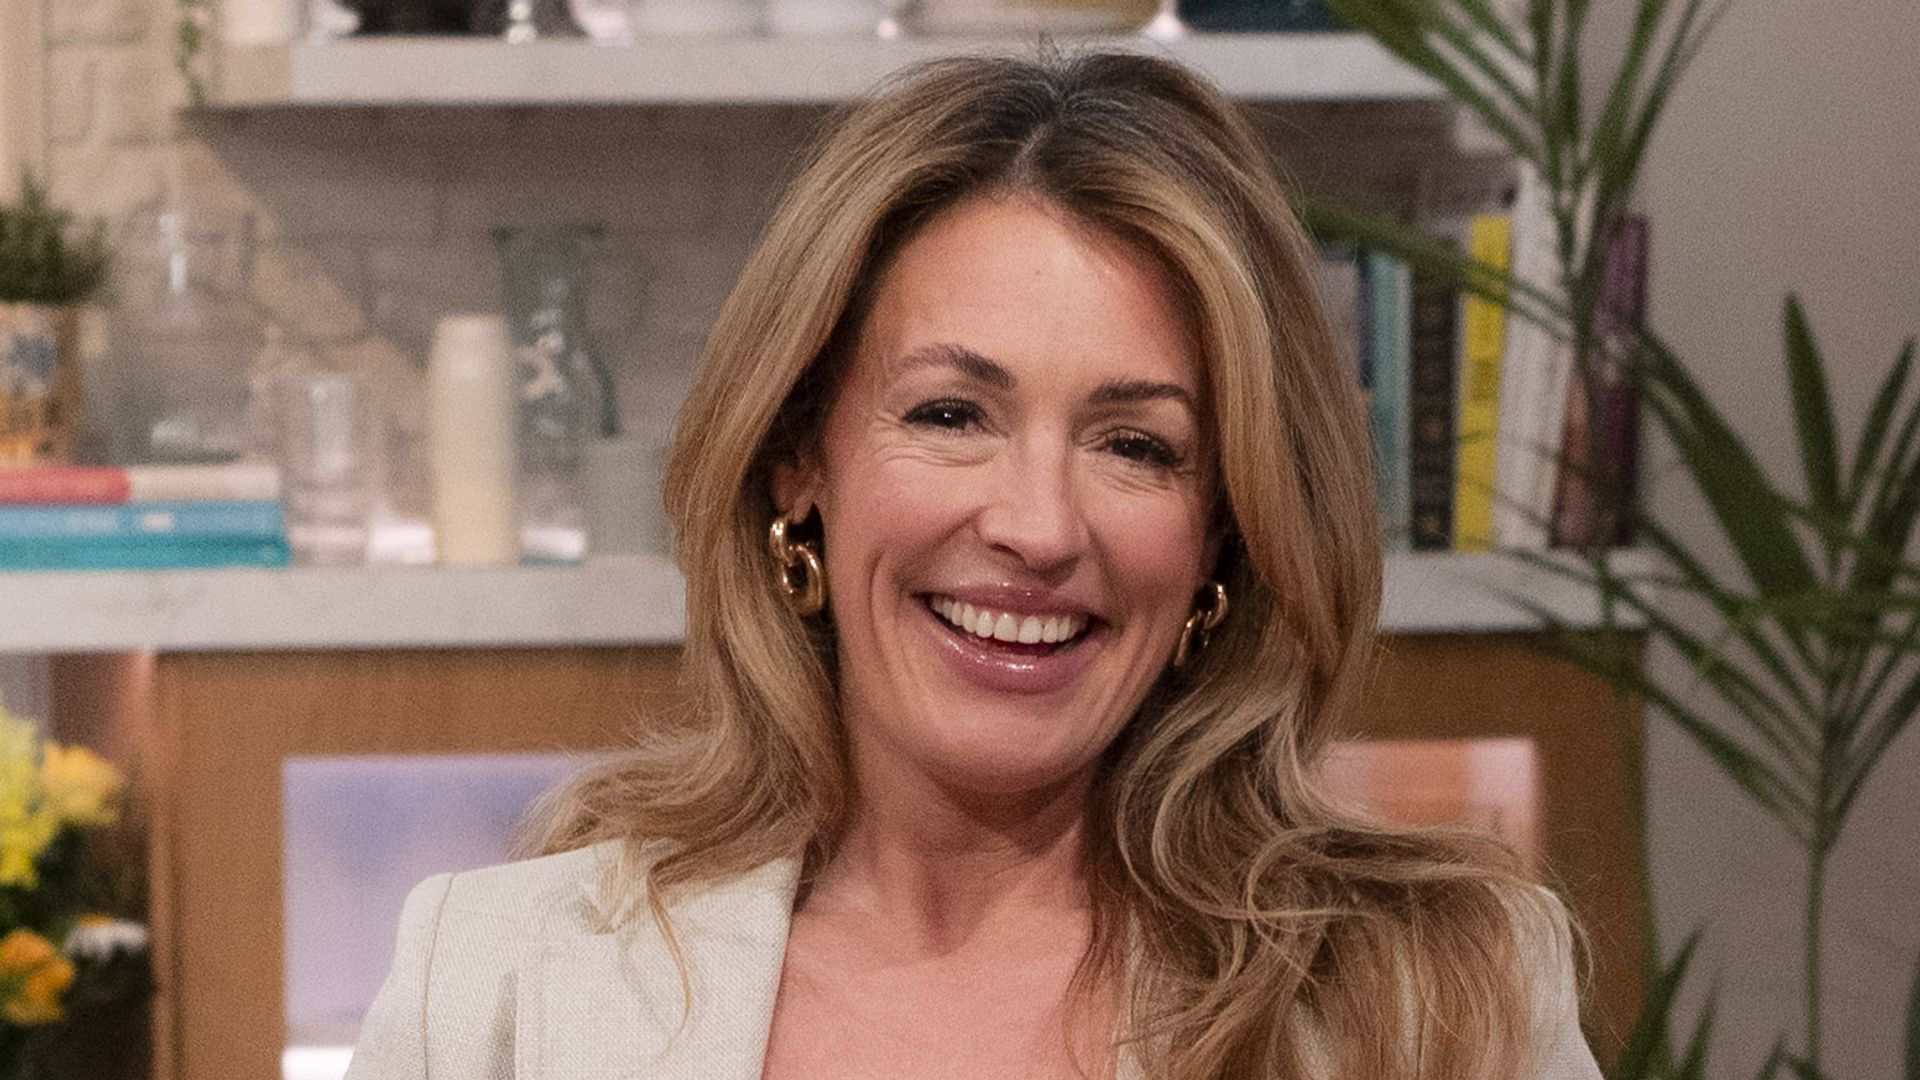 Cat Deeley shares rare candid moment with son - and their hair is identical